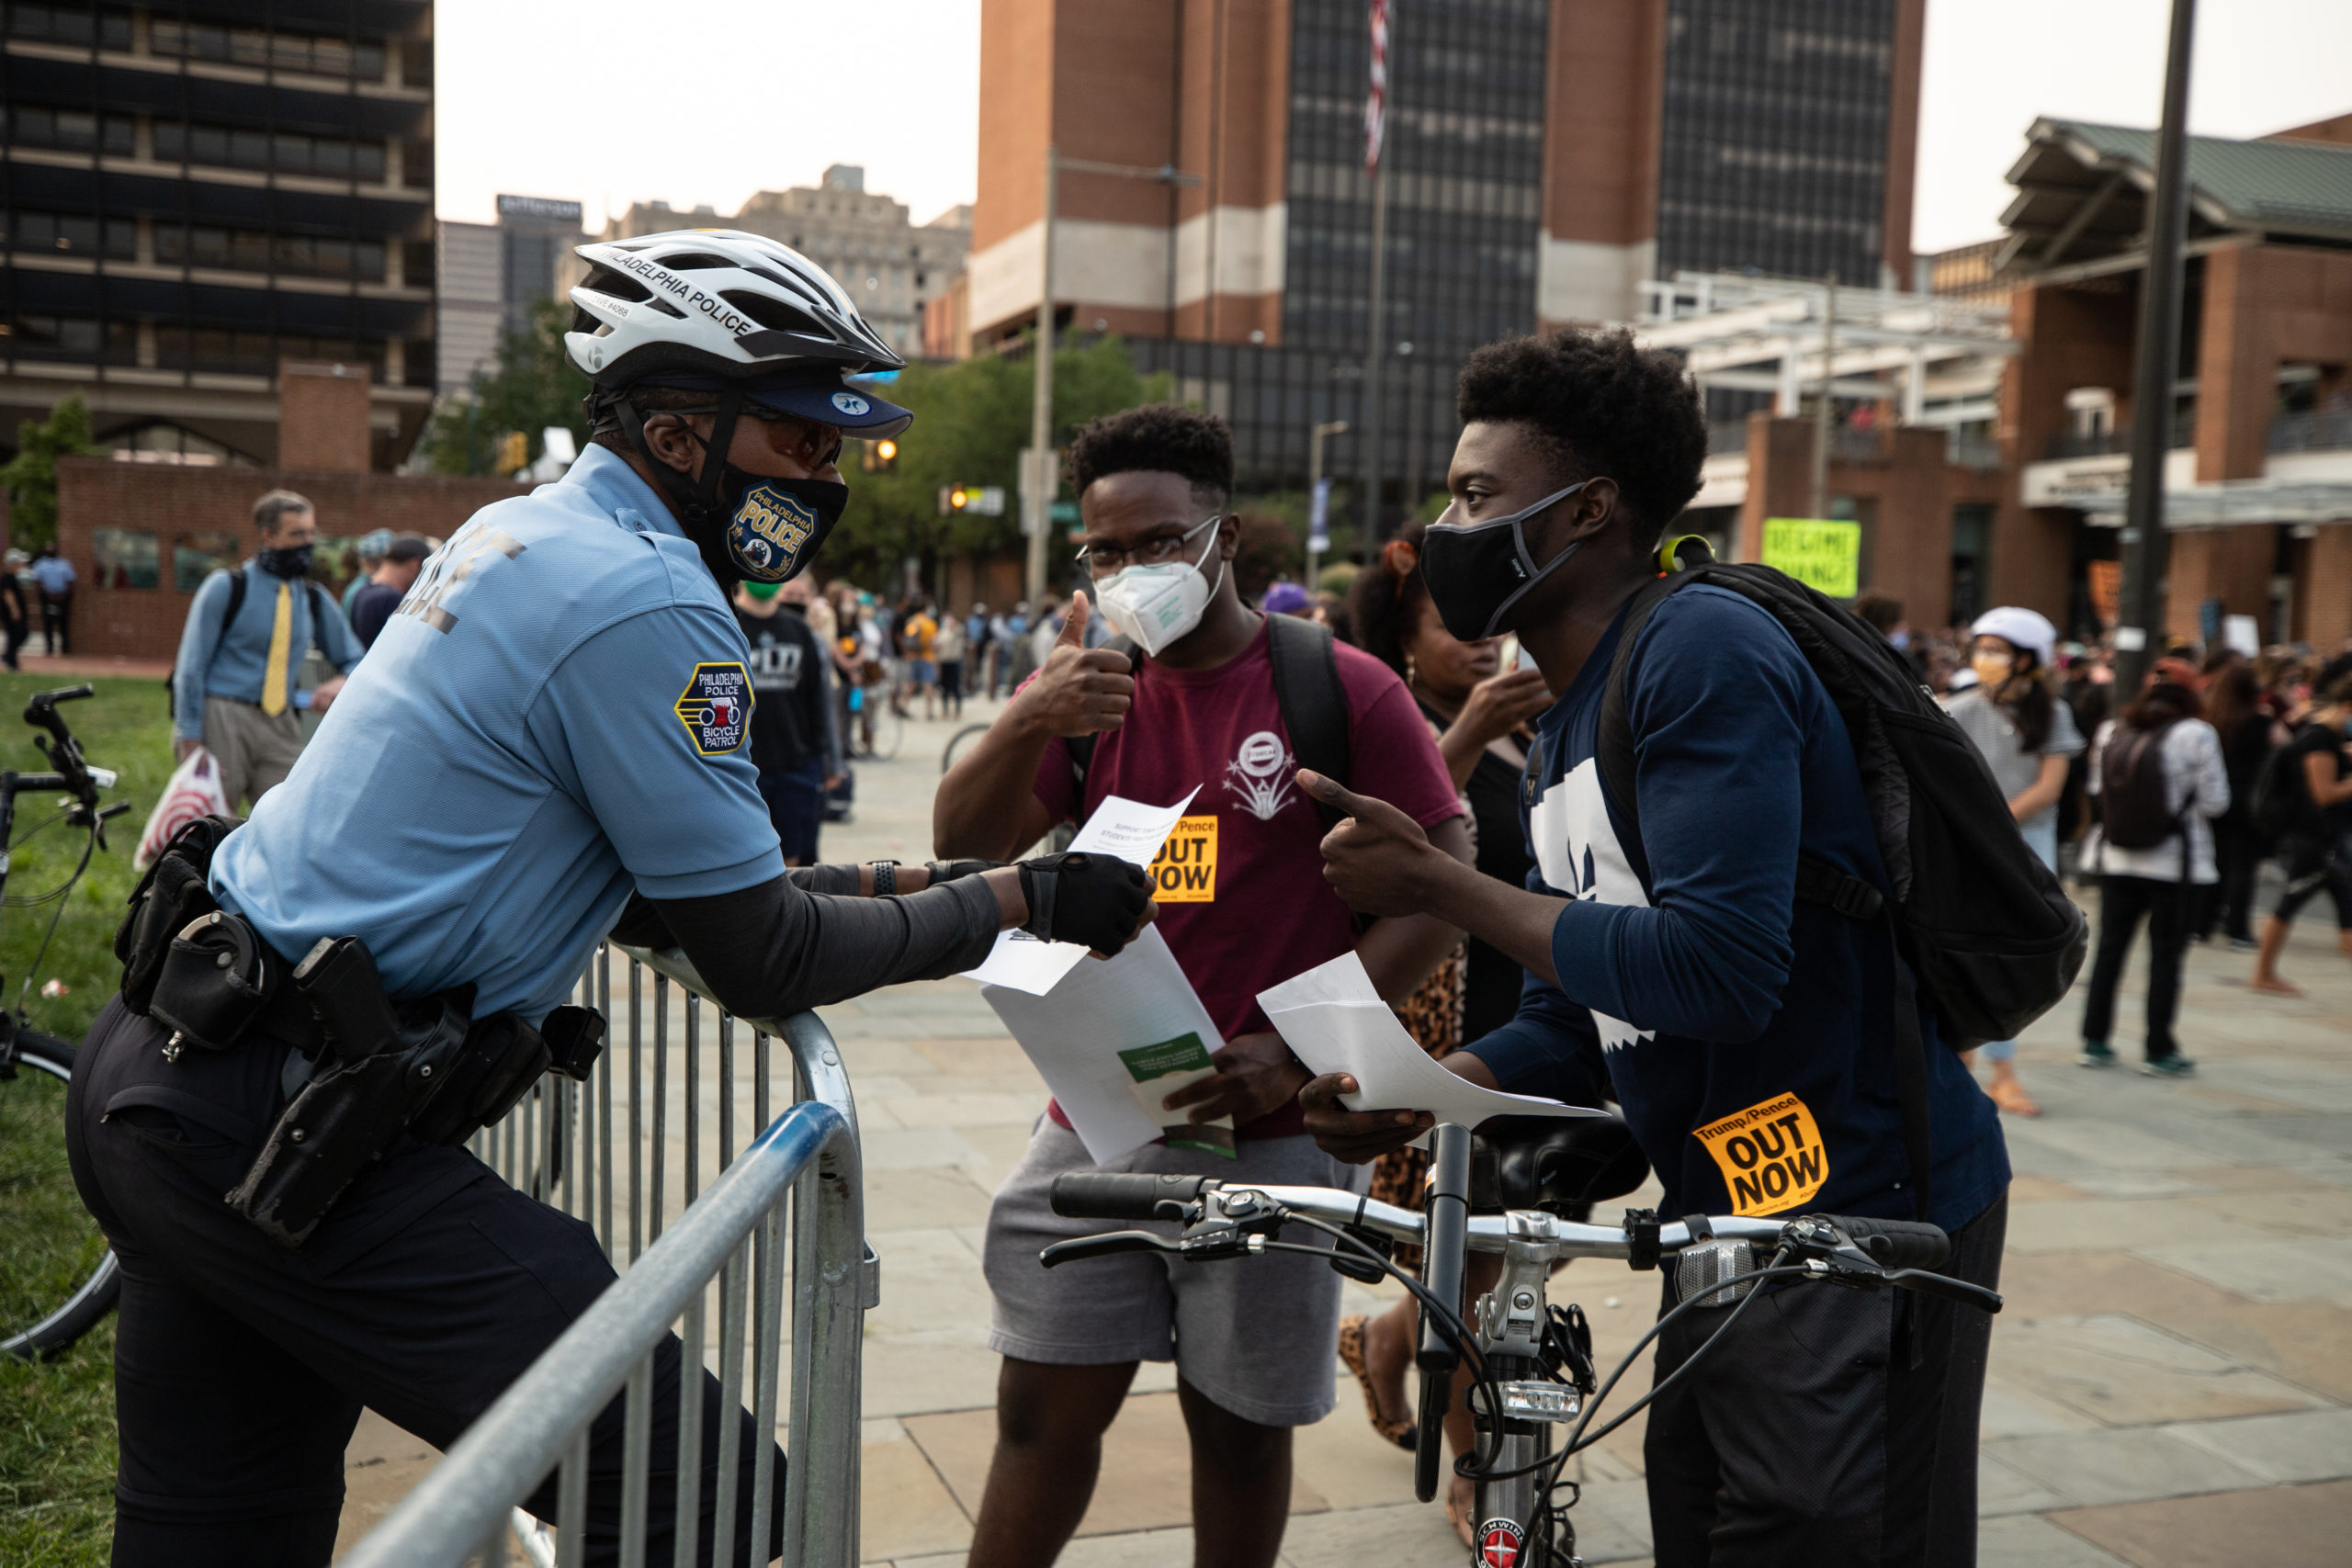 Two college students tell an officer about how they're spreading awareness about their school charging full tuition despite going online in Philadelphia, Pennsylvania on Sept. 15, 2020. (Photo: Kaylee Greenlee / DCNF)